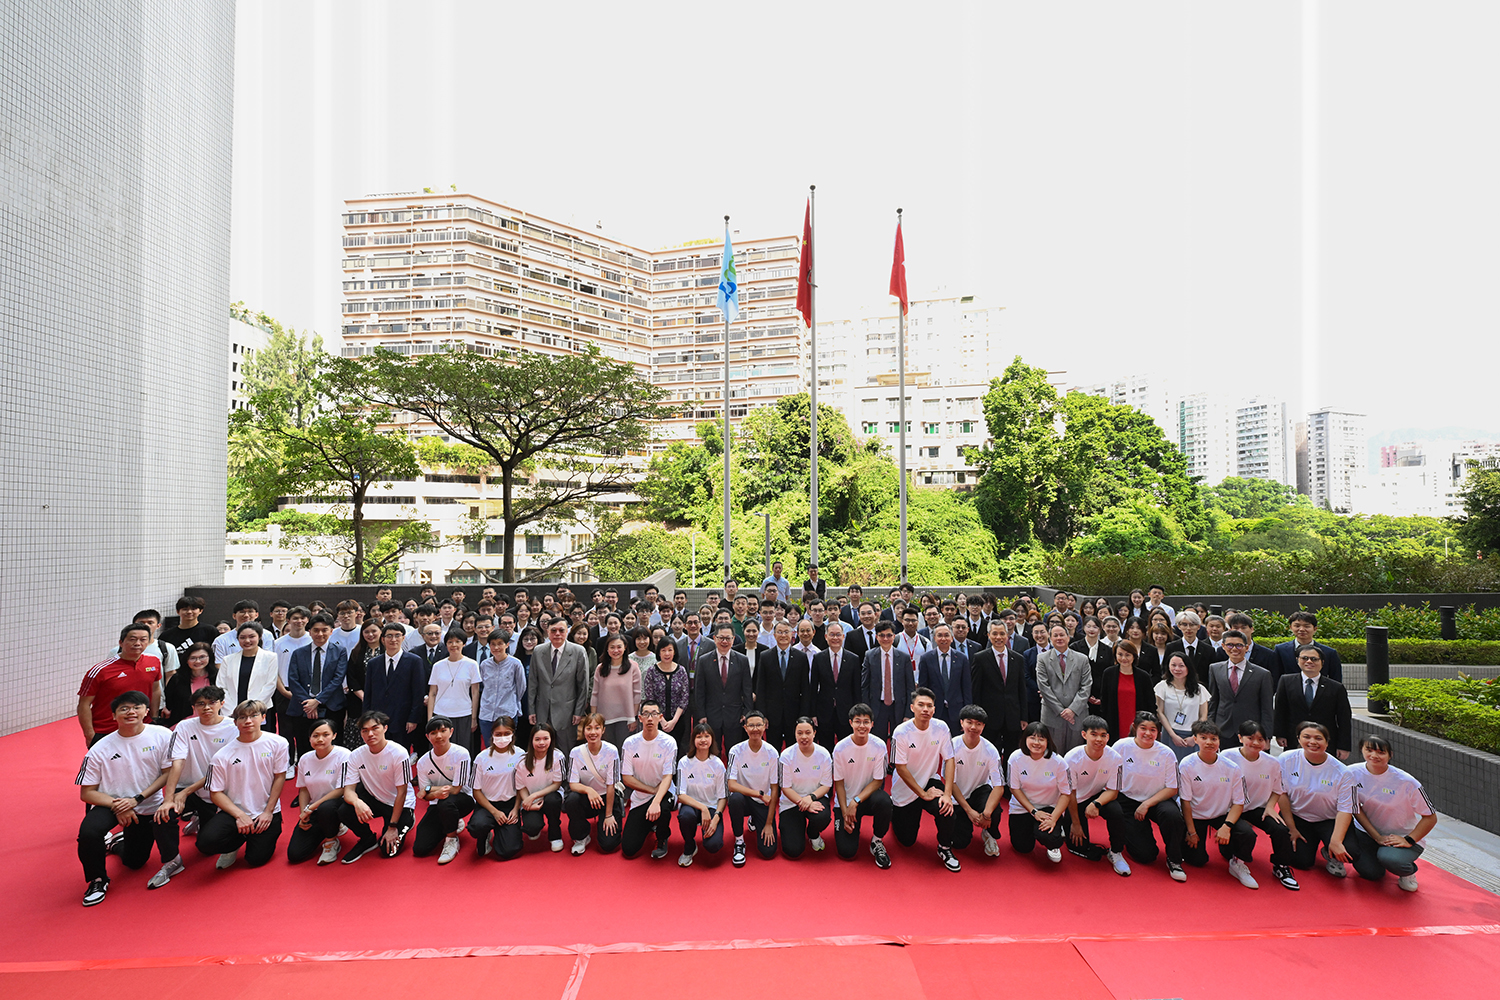 In commemoration of the 74<sup>th</sup> Anniversary of the Founding of the People’s Republic of China, Hong Kong Metropolitan University holds a flag-raising ceremony today (1 October).